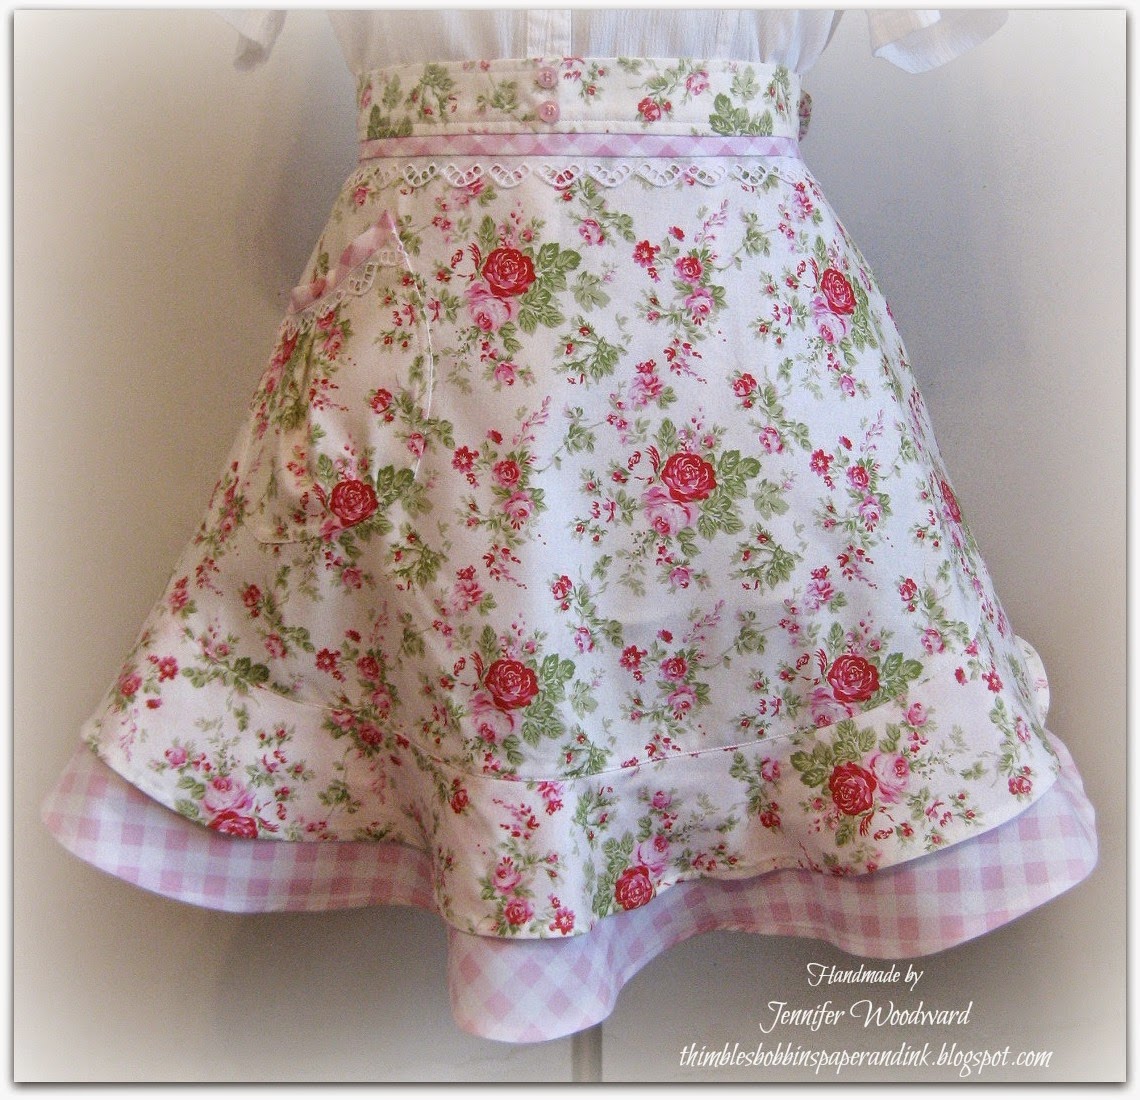 Thimbles, Bobbins, Paper and Ink: Spring time kitchen linens and aprons